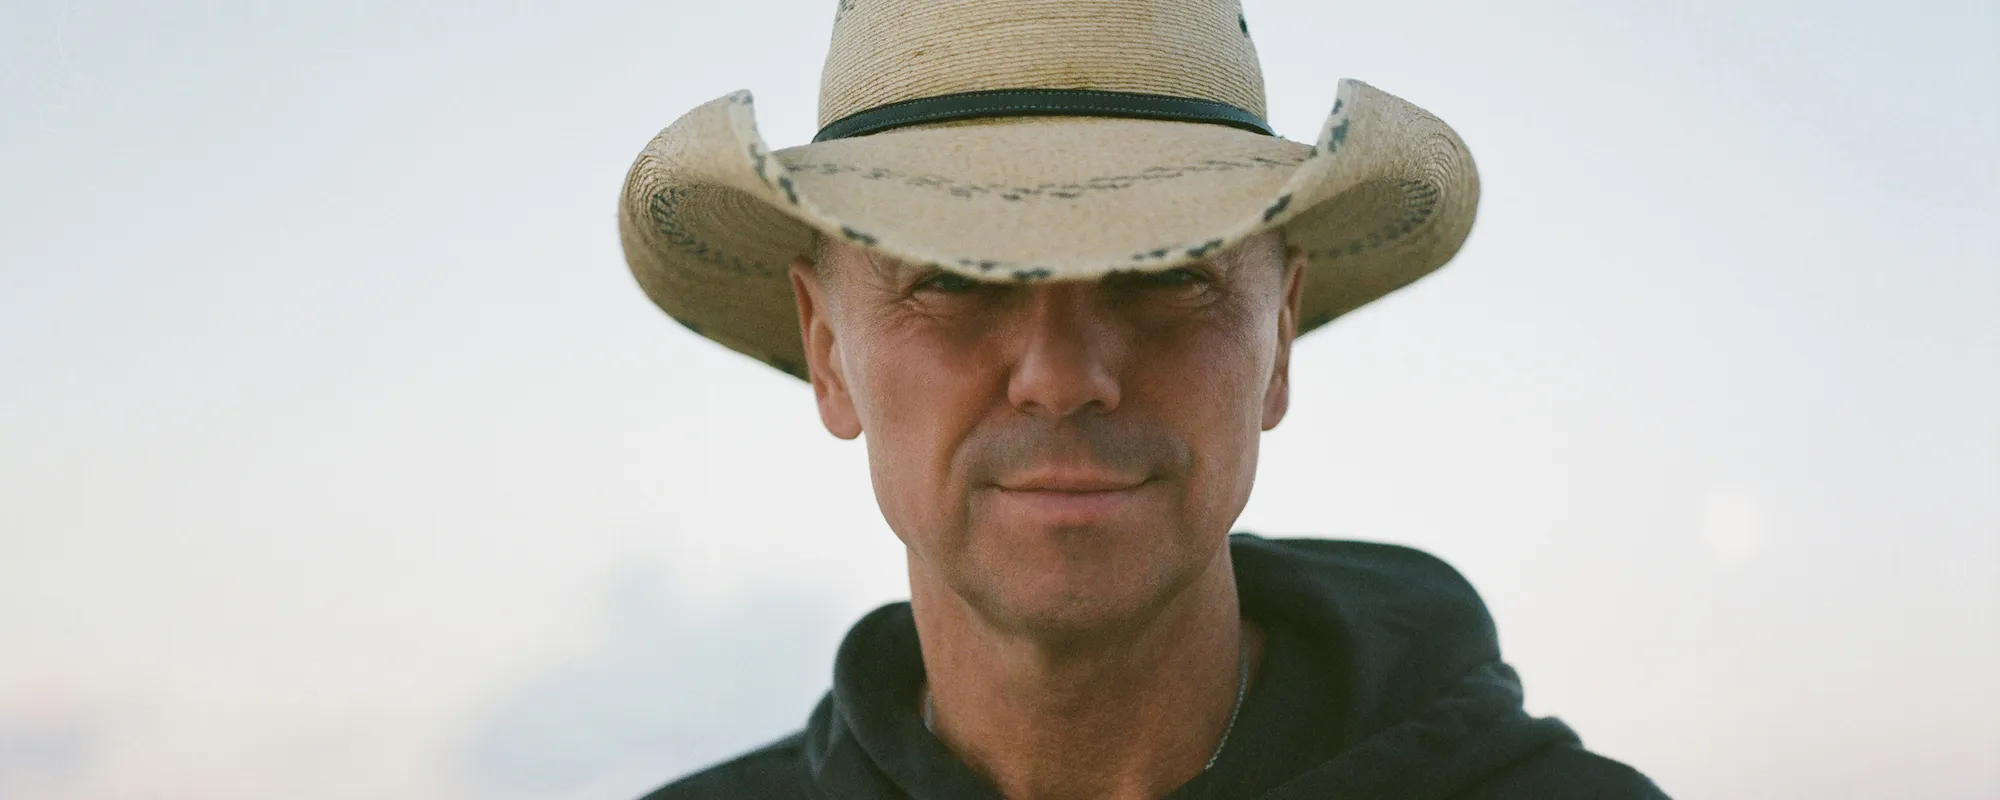 Listen: Kenny Chesney Returns with Life-Spanning Love Song “Take Her Home”